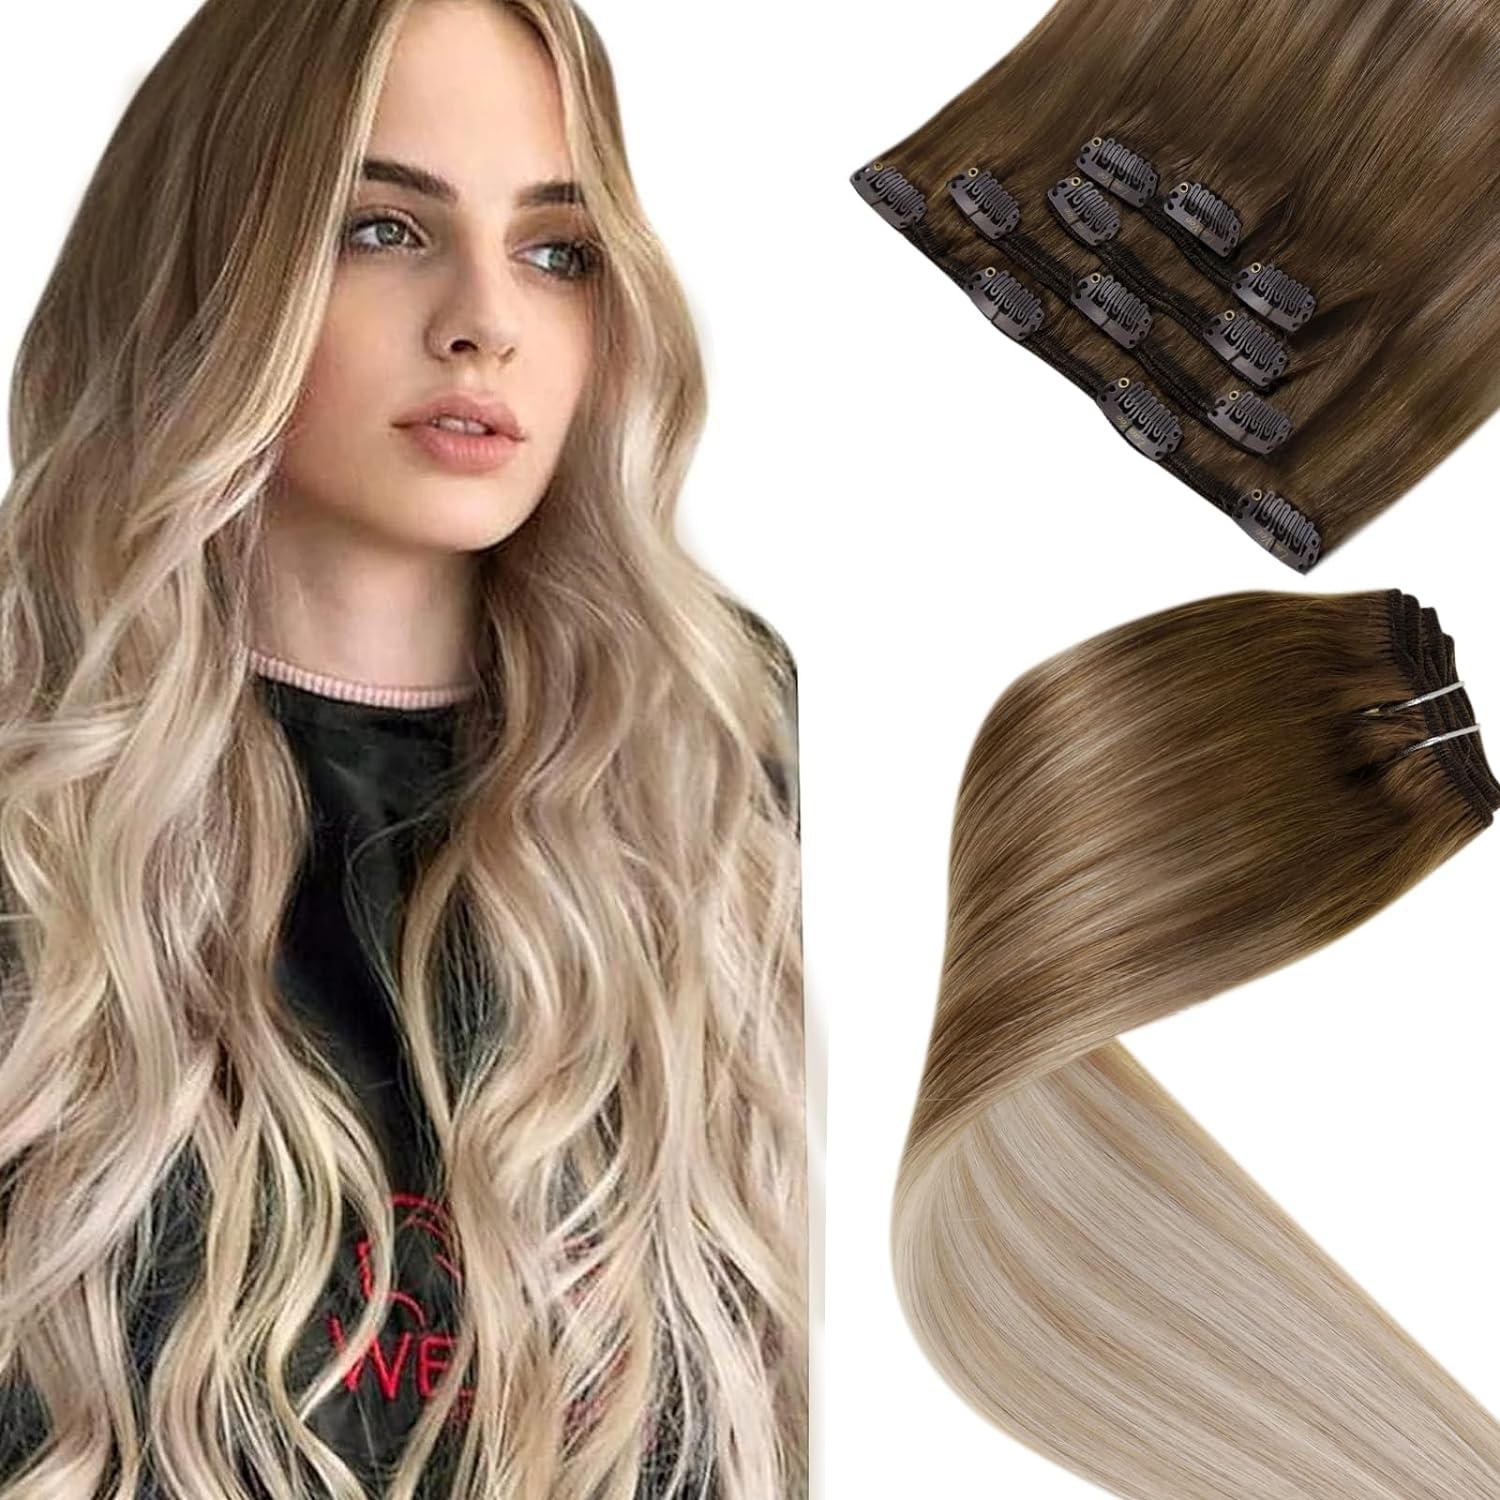 LaaVoo Clip in Hair Extensions Real Human Hair Ombre Light Brown to Ash Blonde M